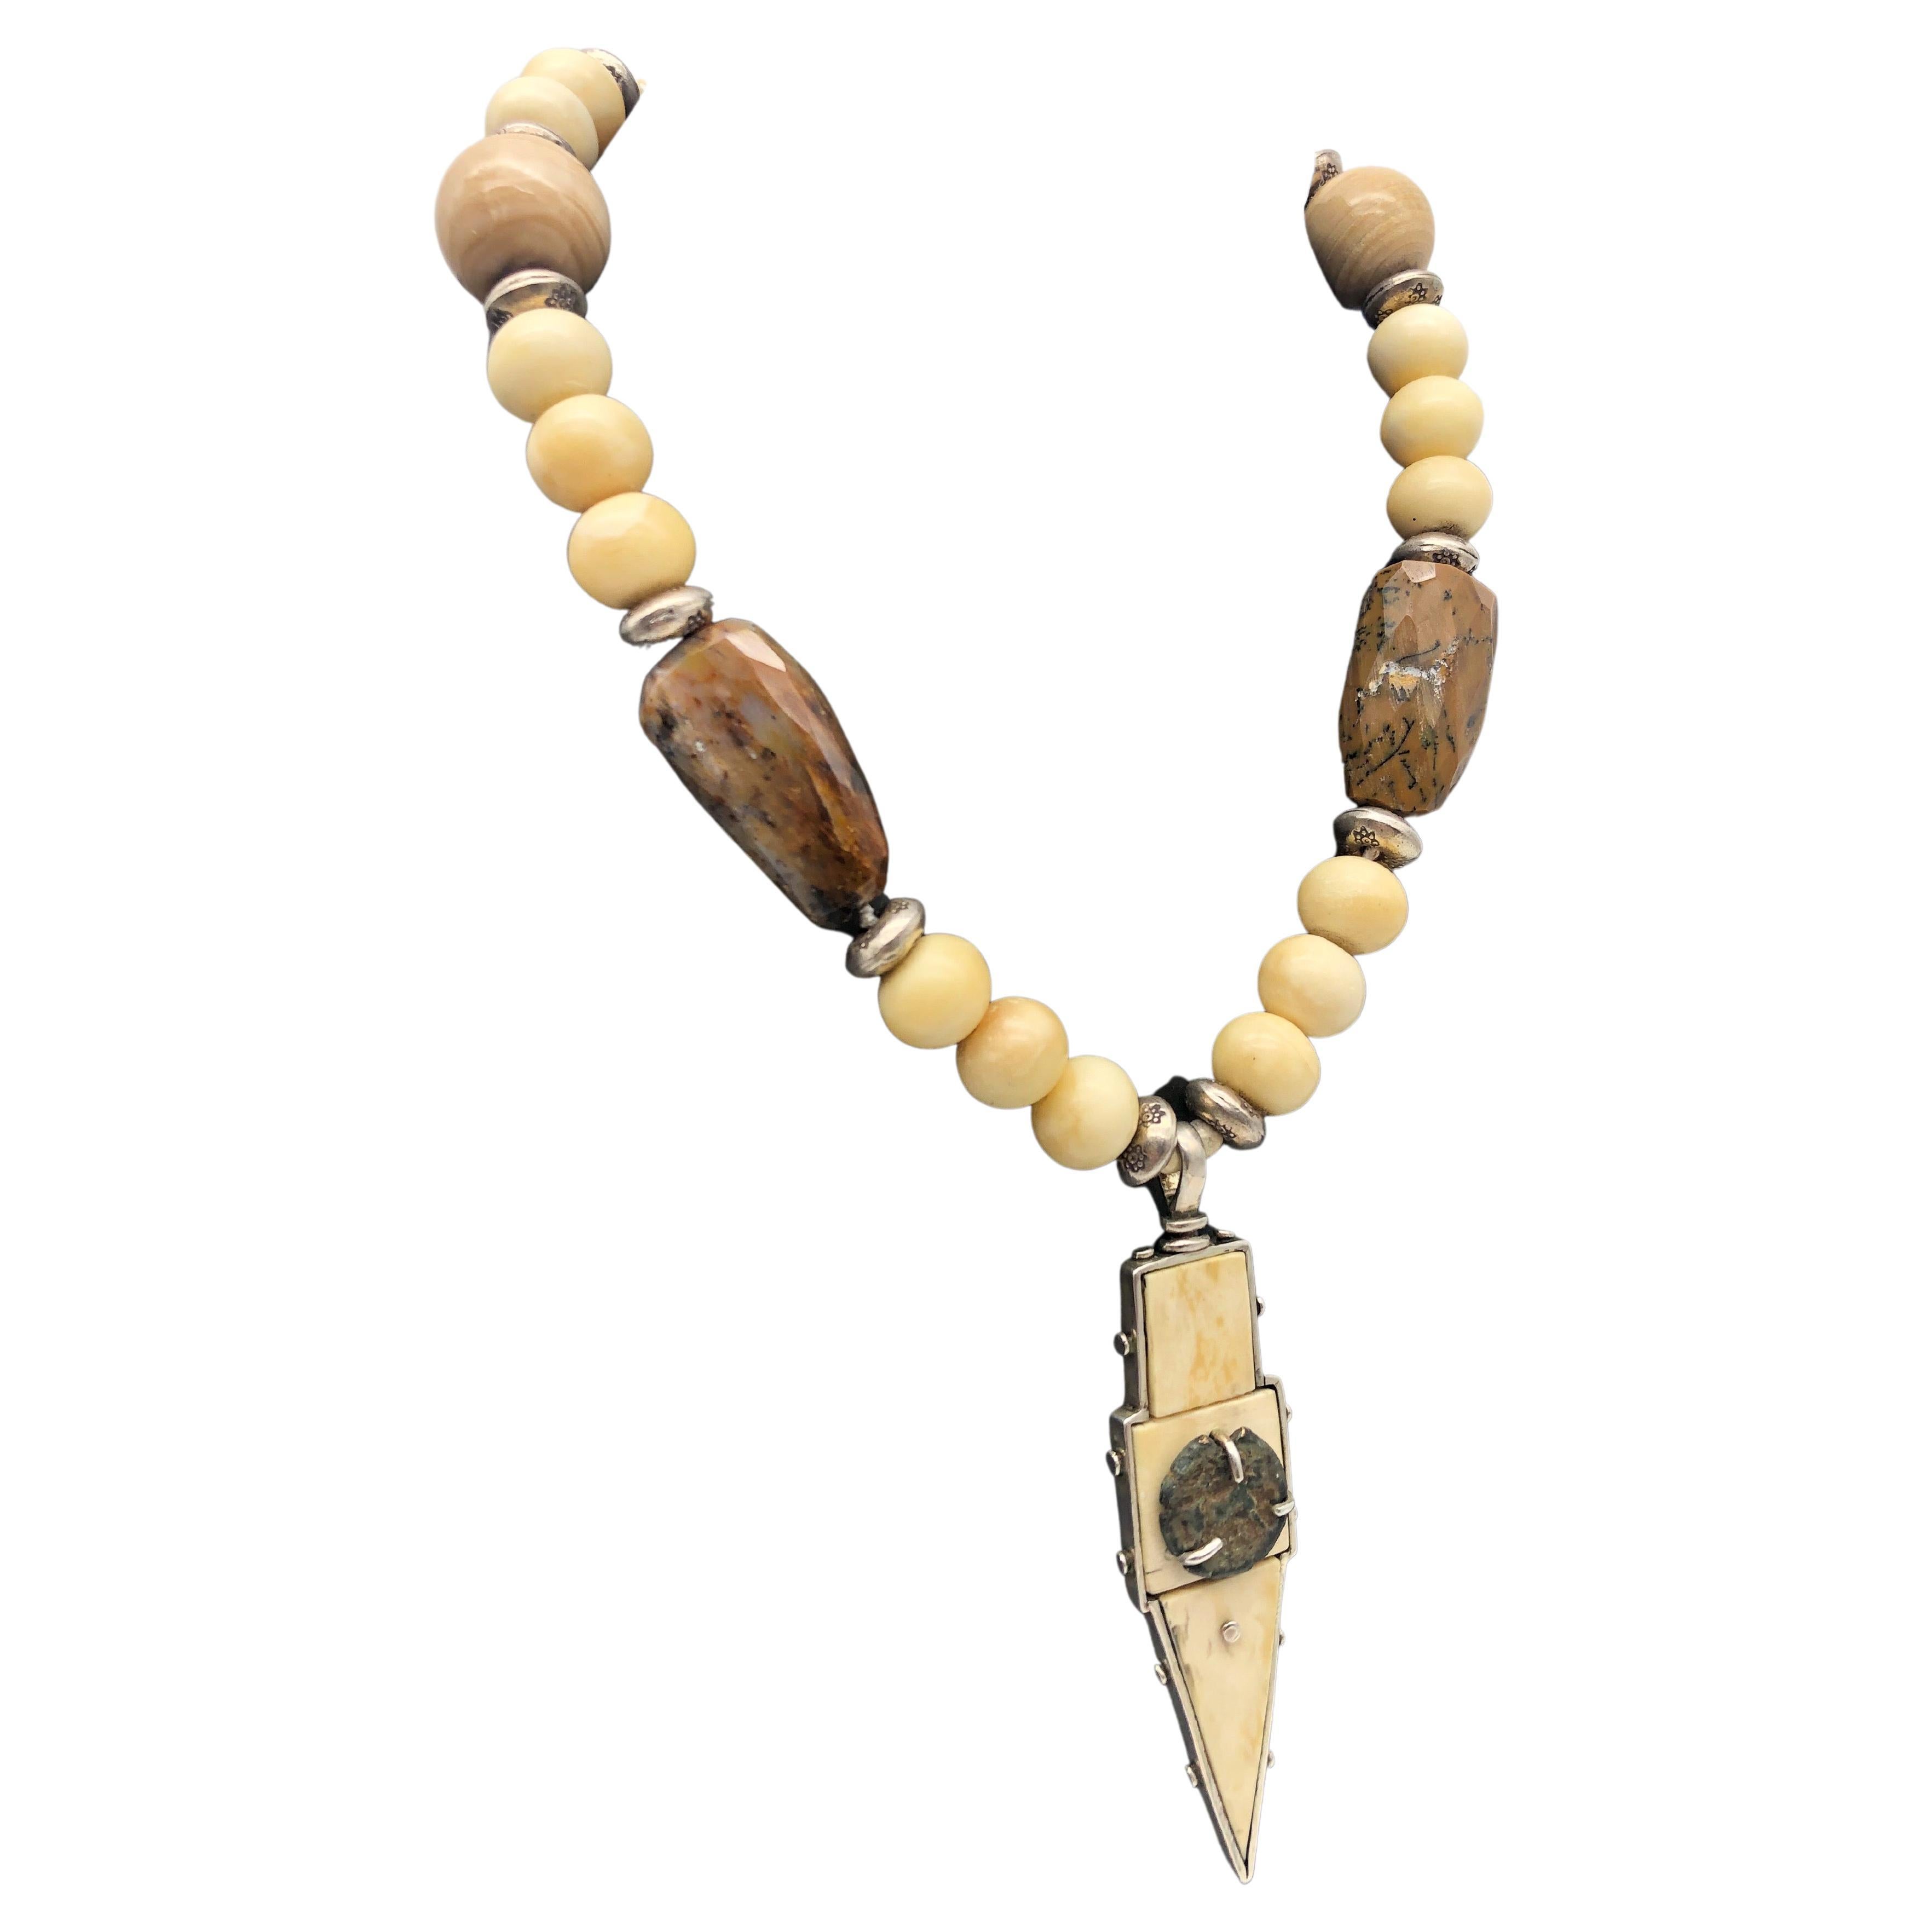 One-of-a-Kind

The pendant is a mix of sterling silver, Prehistoric walrus bone, and an ancient Roman coin anchoring a coordinating necklace in soft monochromatic colors of polished jasper and sterling silver beads. A clasp set in sterling silver is